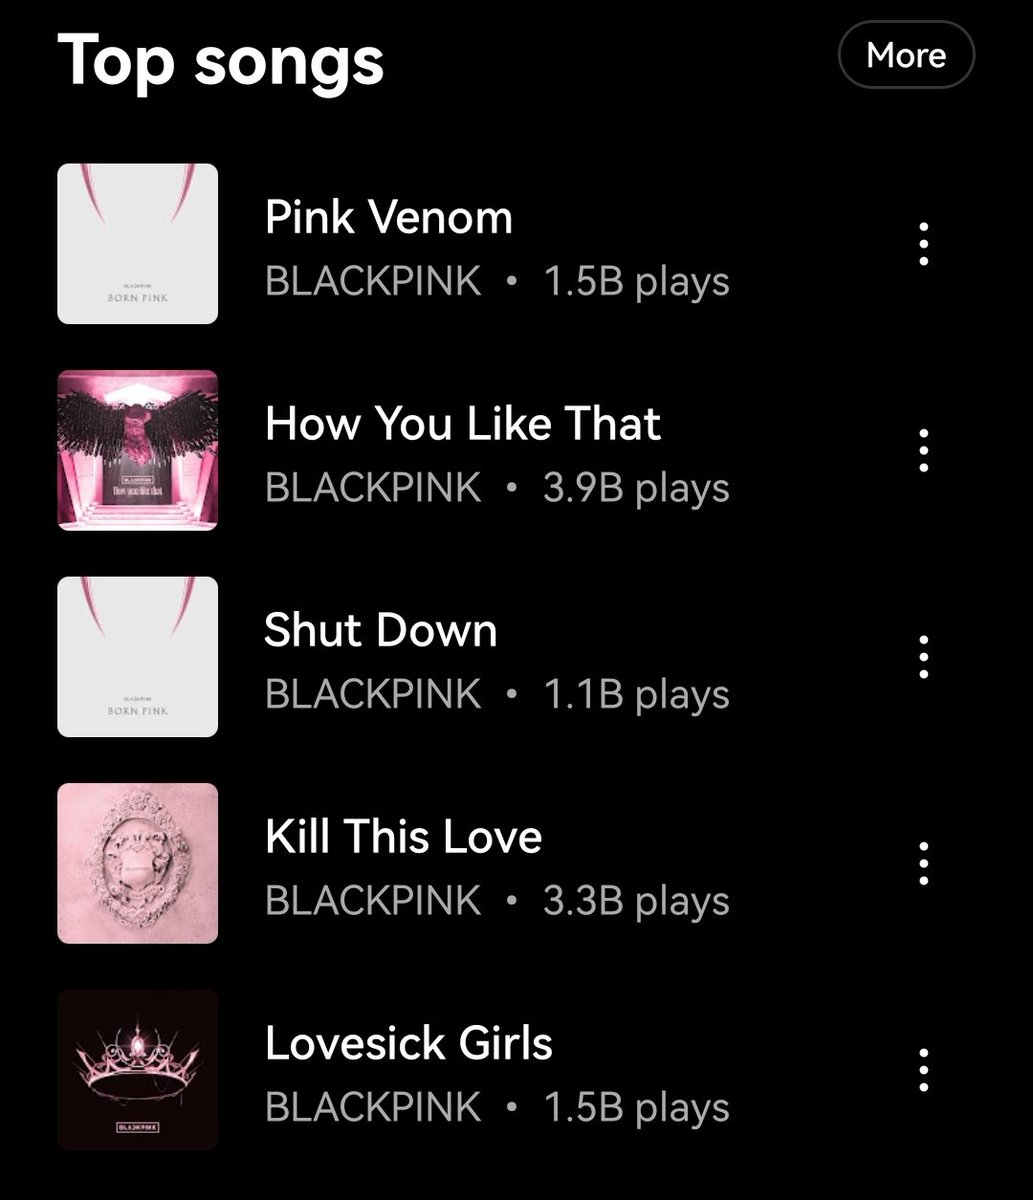 “Lovesick Girls” has entered #BLACKPINK's Top 5 most popular songs on YouTube Music at #5.